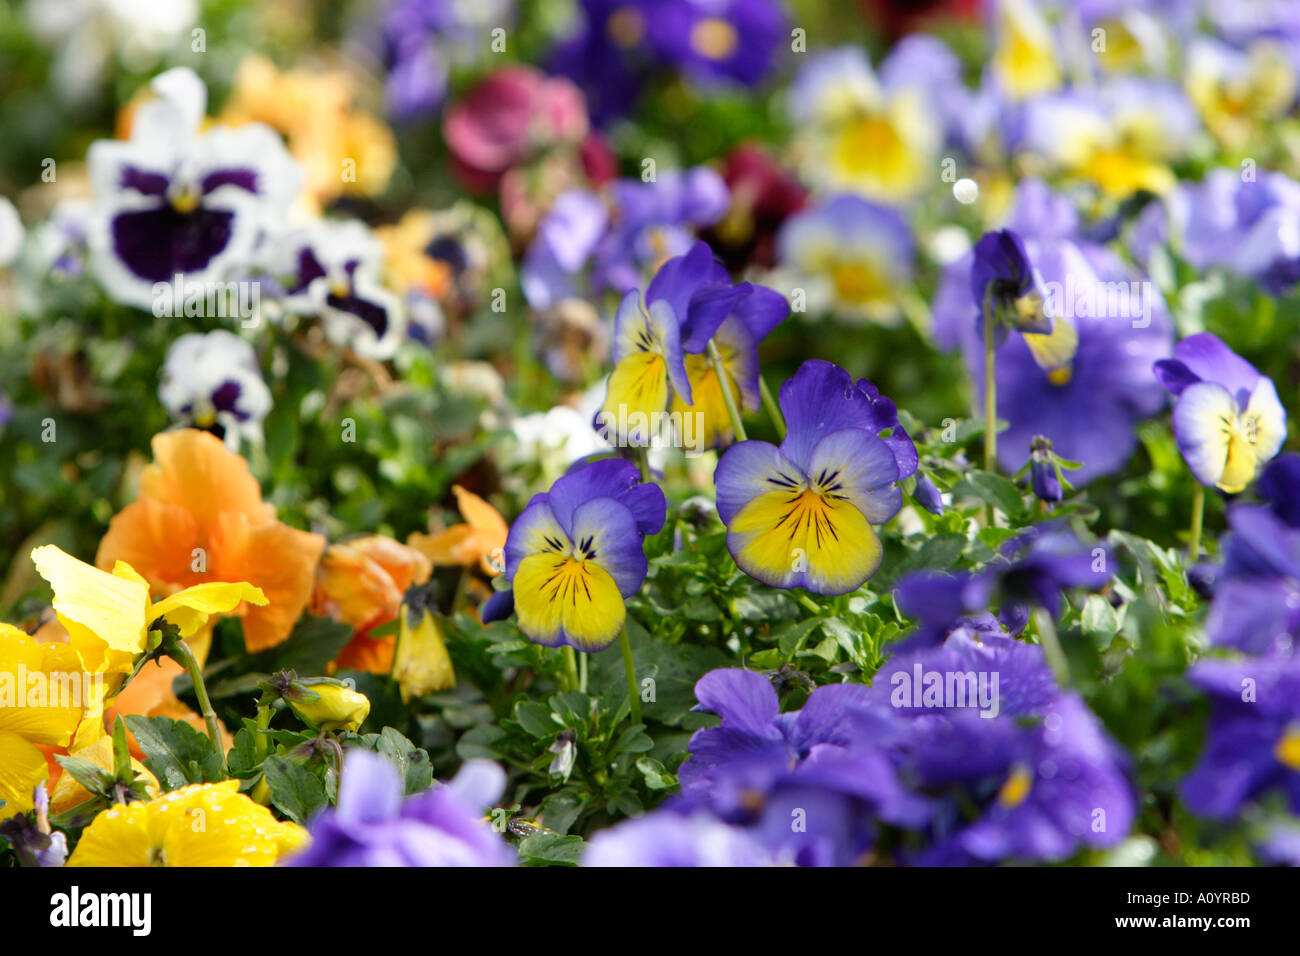 Colorful field of Pansies Stock Photo